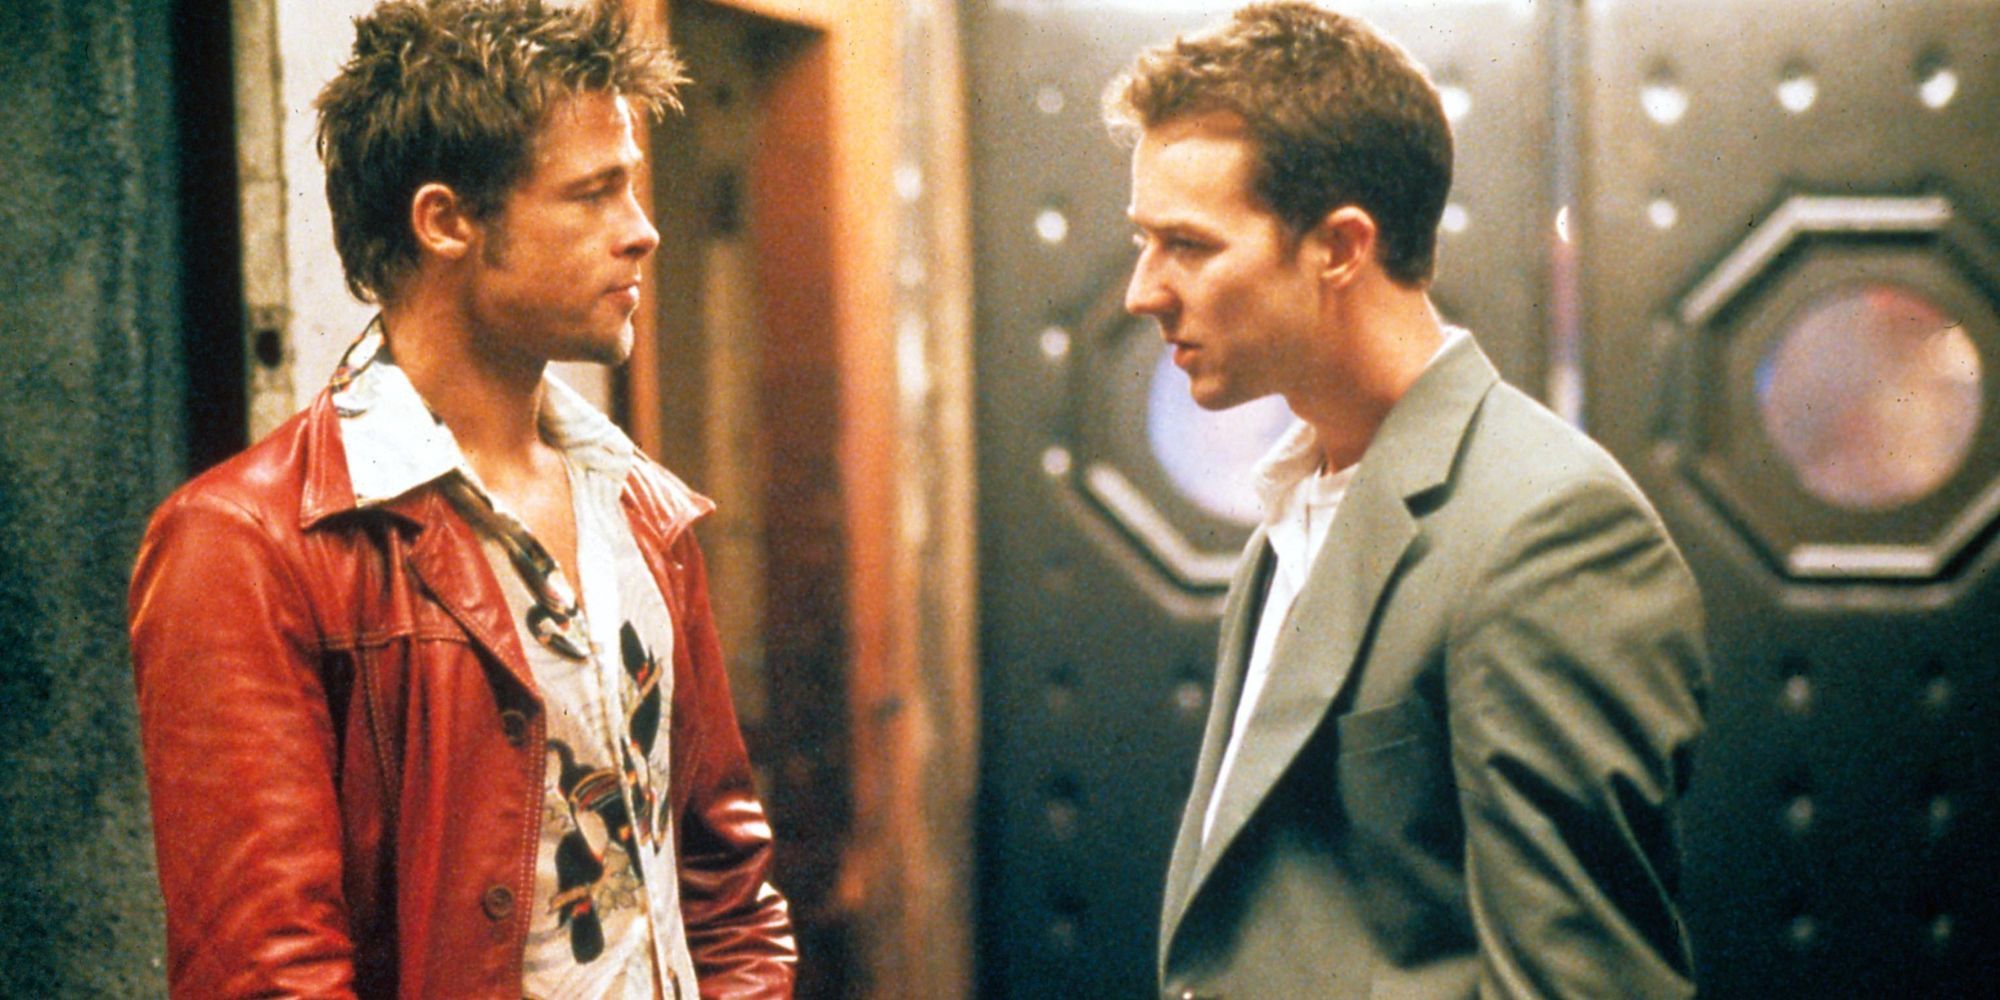 Tyler Durden and the narrator in 'Fight Club'